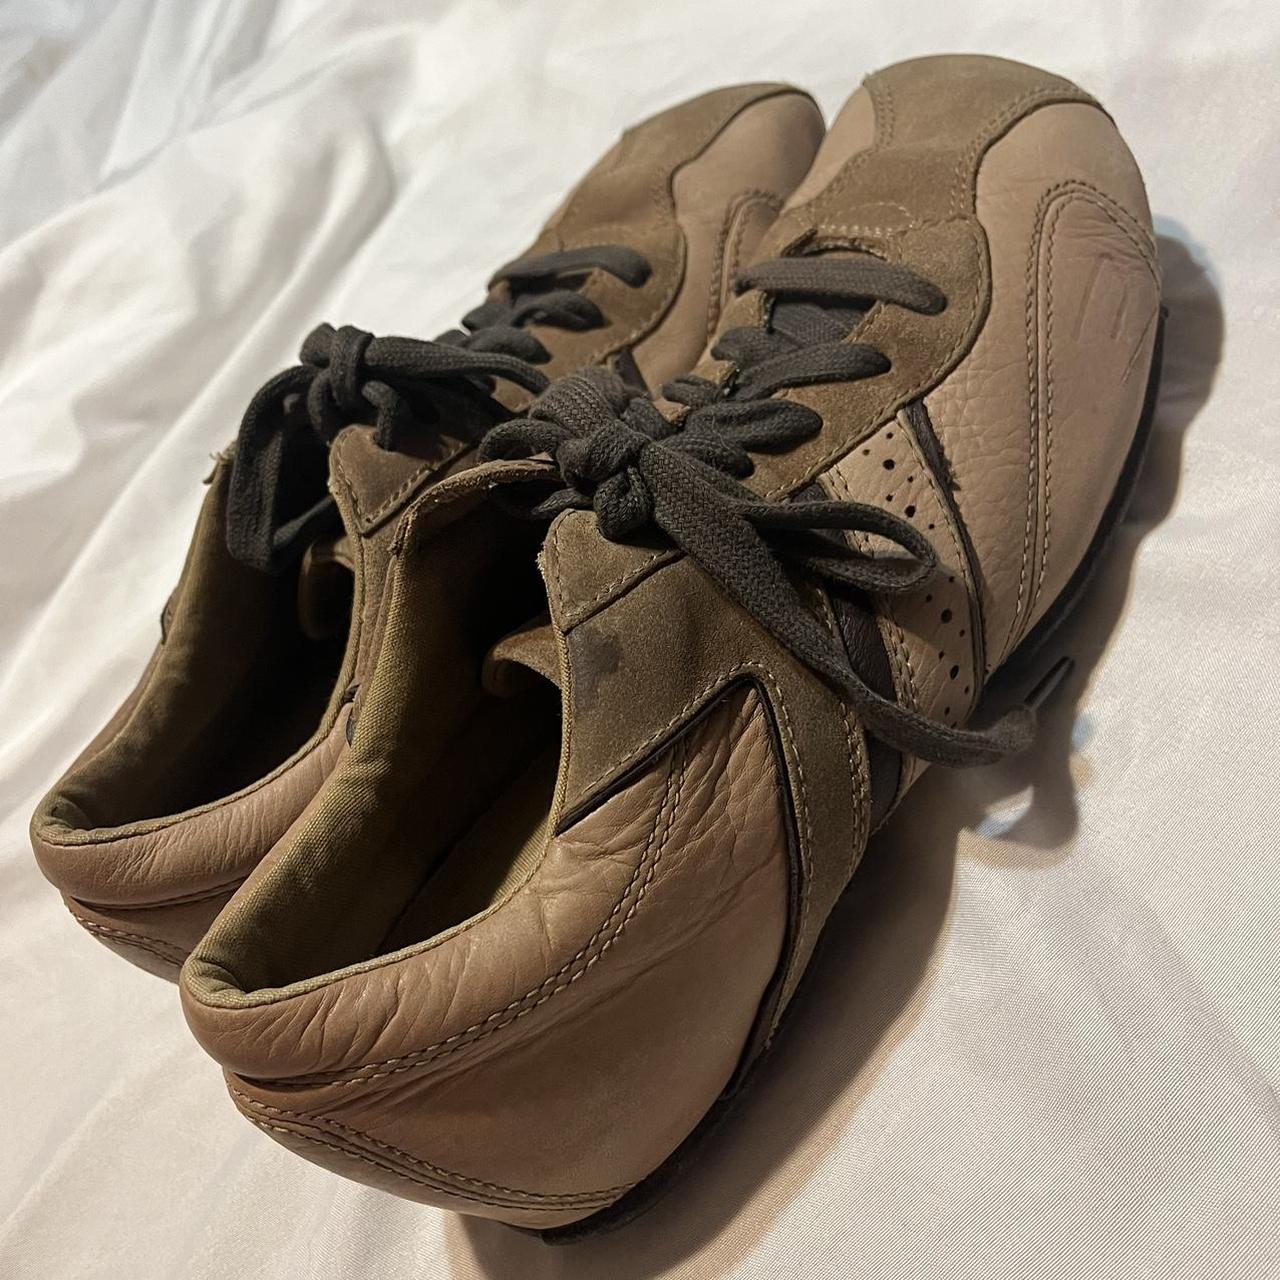 DIESEL Windom Casual leather shoes. Great condition, - Depop